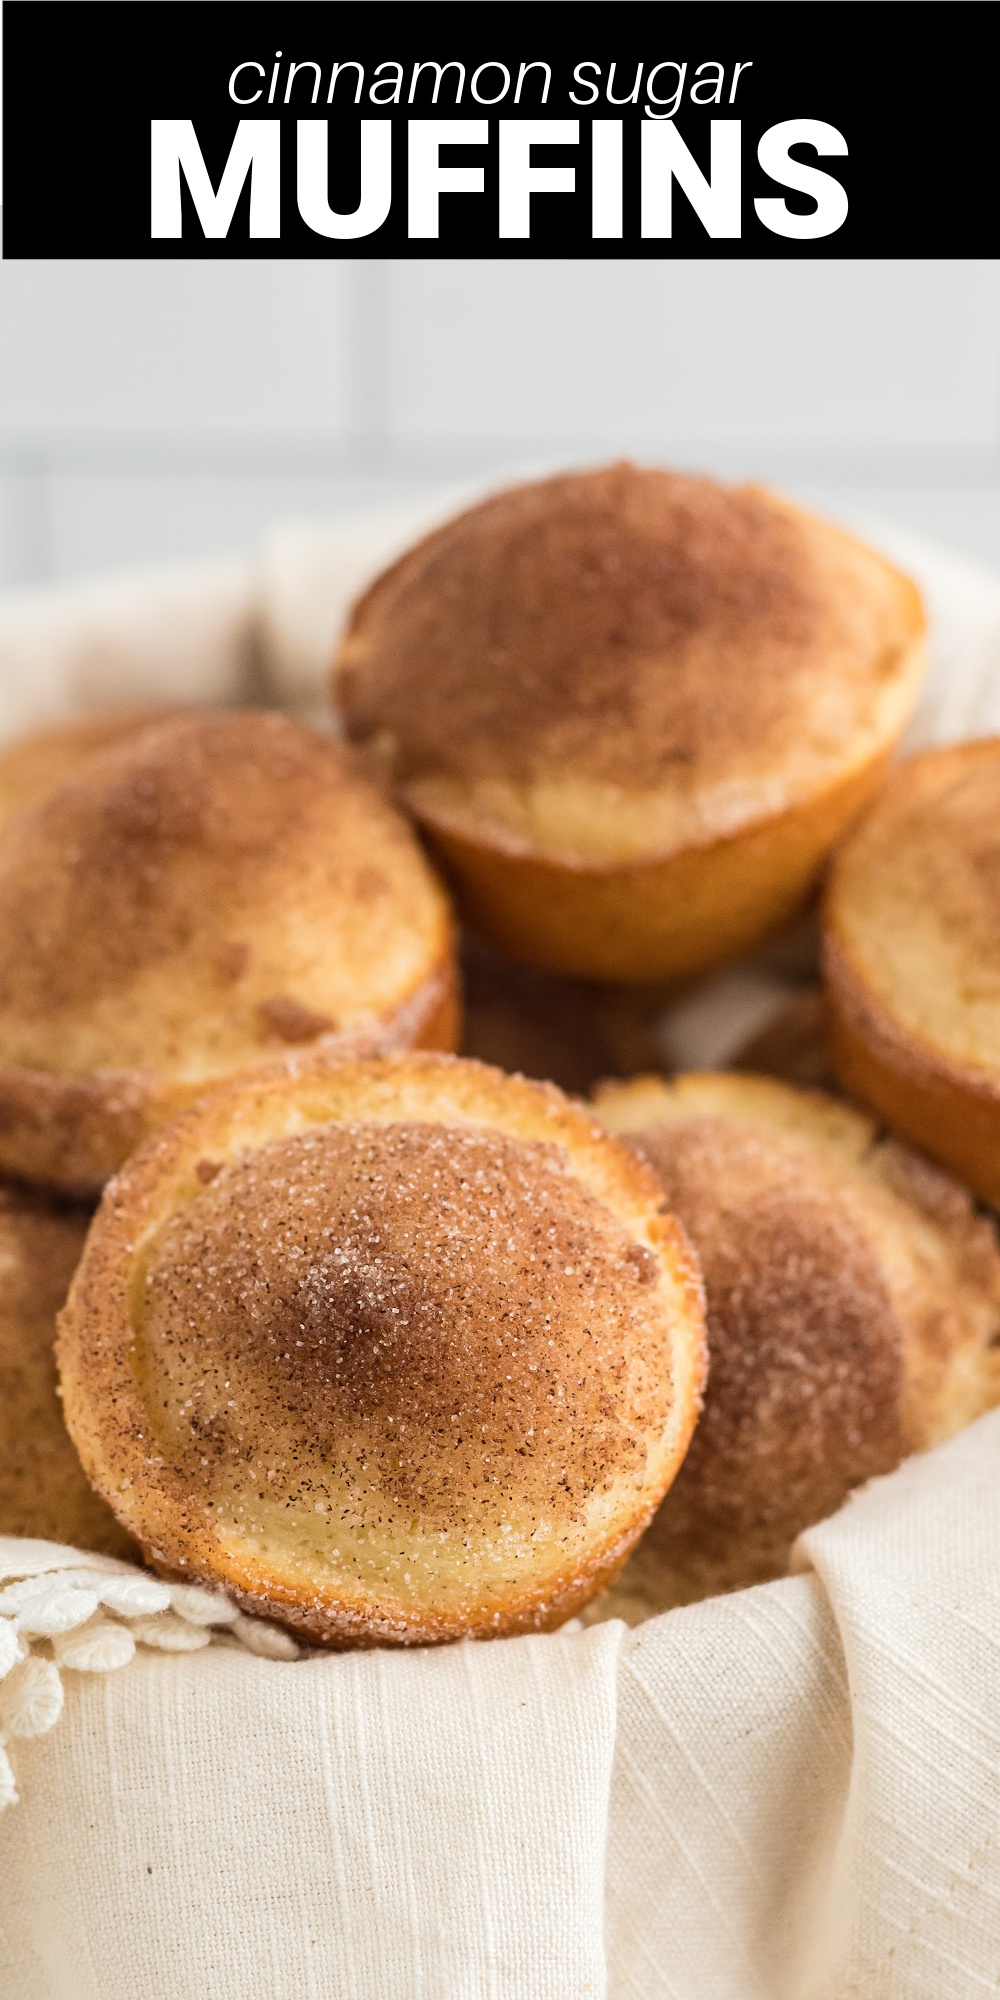 Cinnamon Sugar Muffins can also be known as donut muffins or cinnamon sugar donut muffins. That perfect cinnamon sugar coated outer with the soft and fluffy inside is what makes these muffins unique, and it’s also what makes it impossible to only have one! It's like a snickerdoodle cookie, but as a muffin.